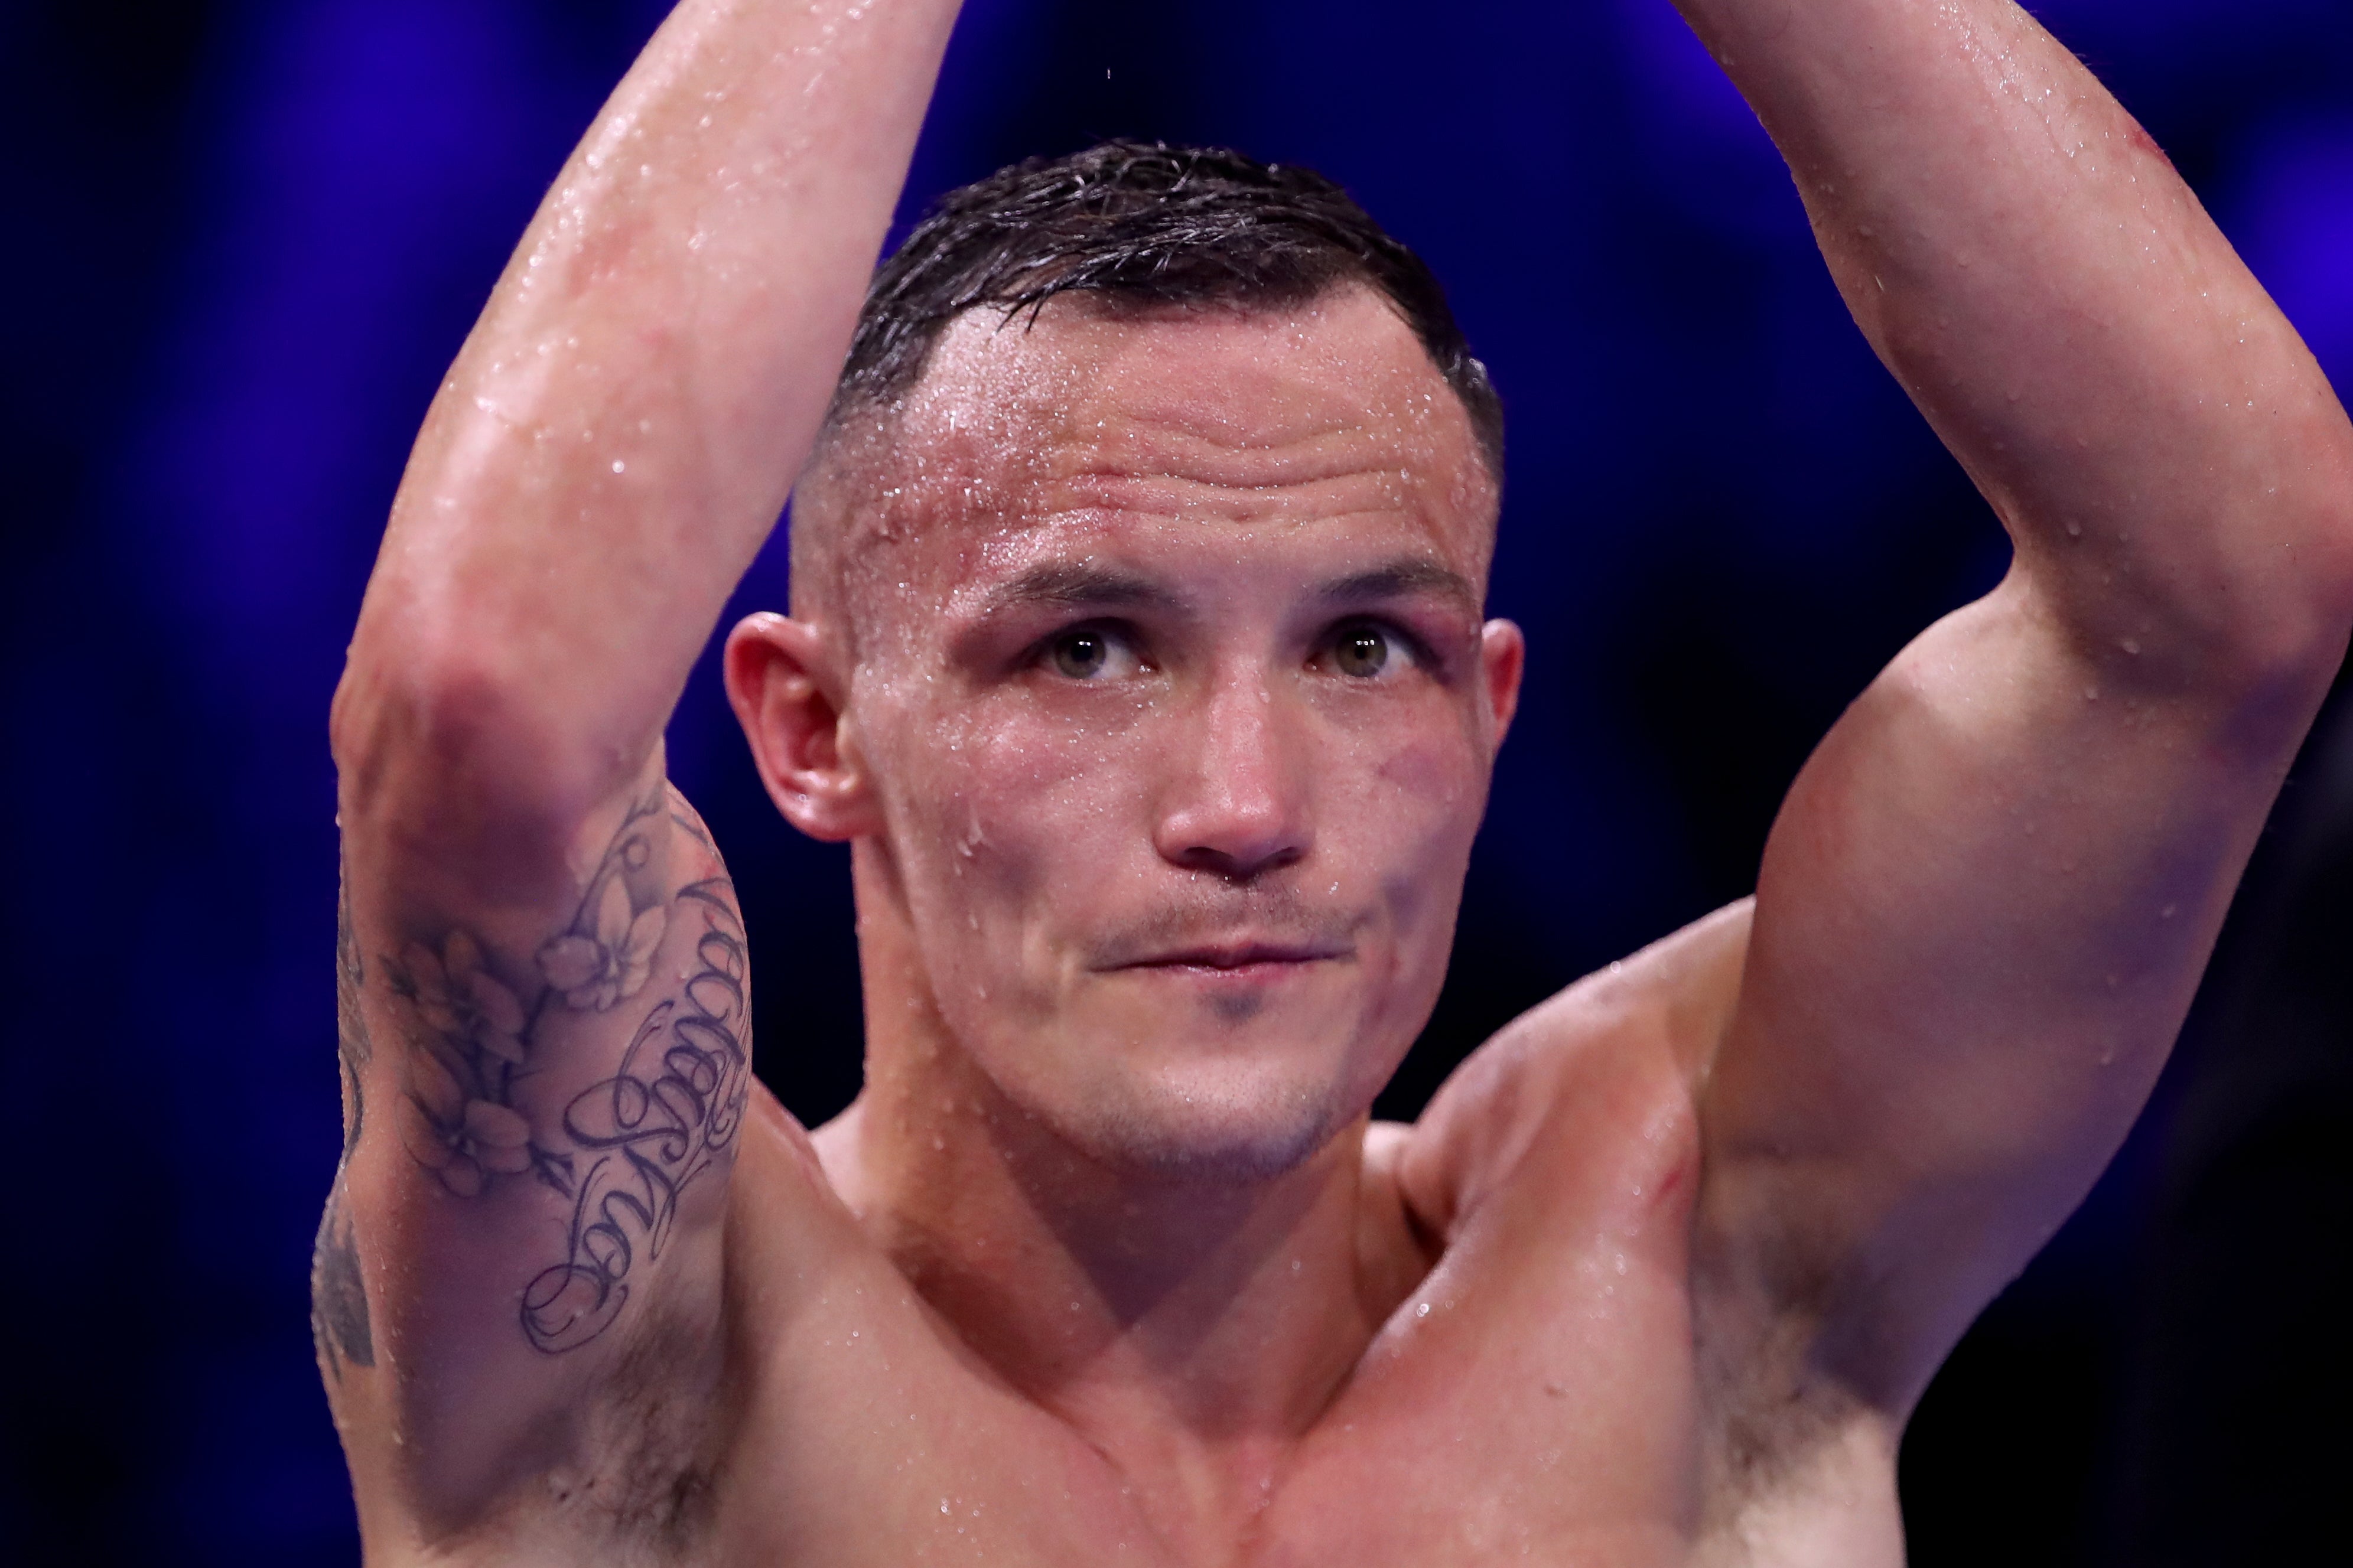 Josh Warrington reacts to a devastating defeat after a largely impressive performance